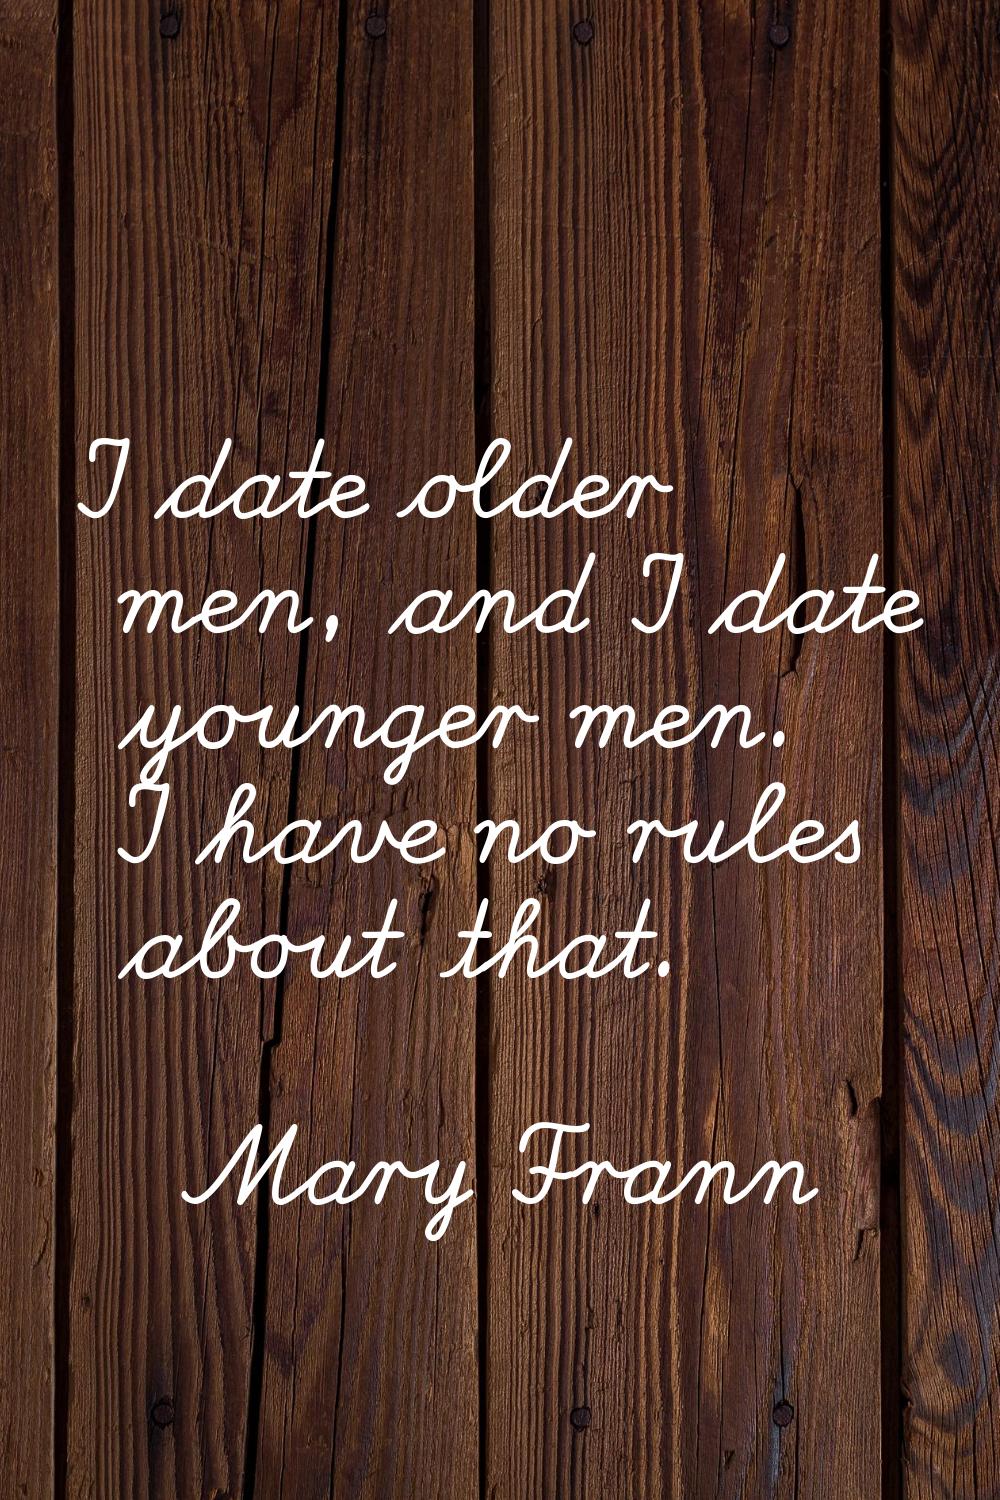 I date older men, and I date younger men. I have no rules about that.